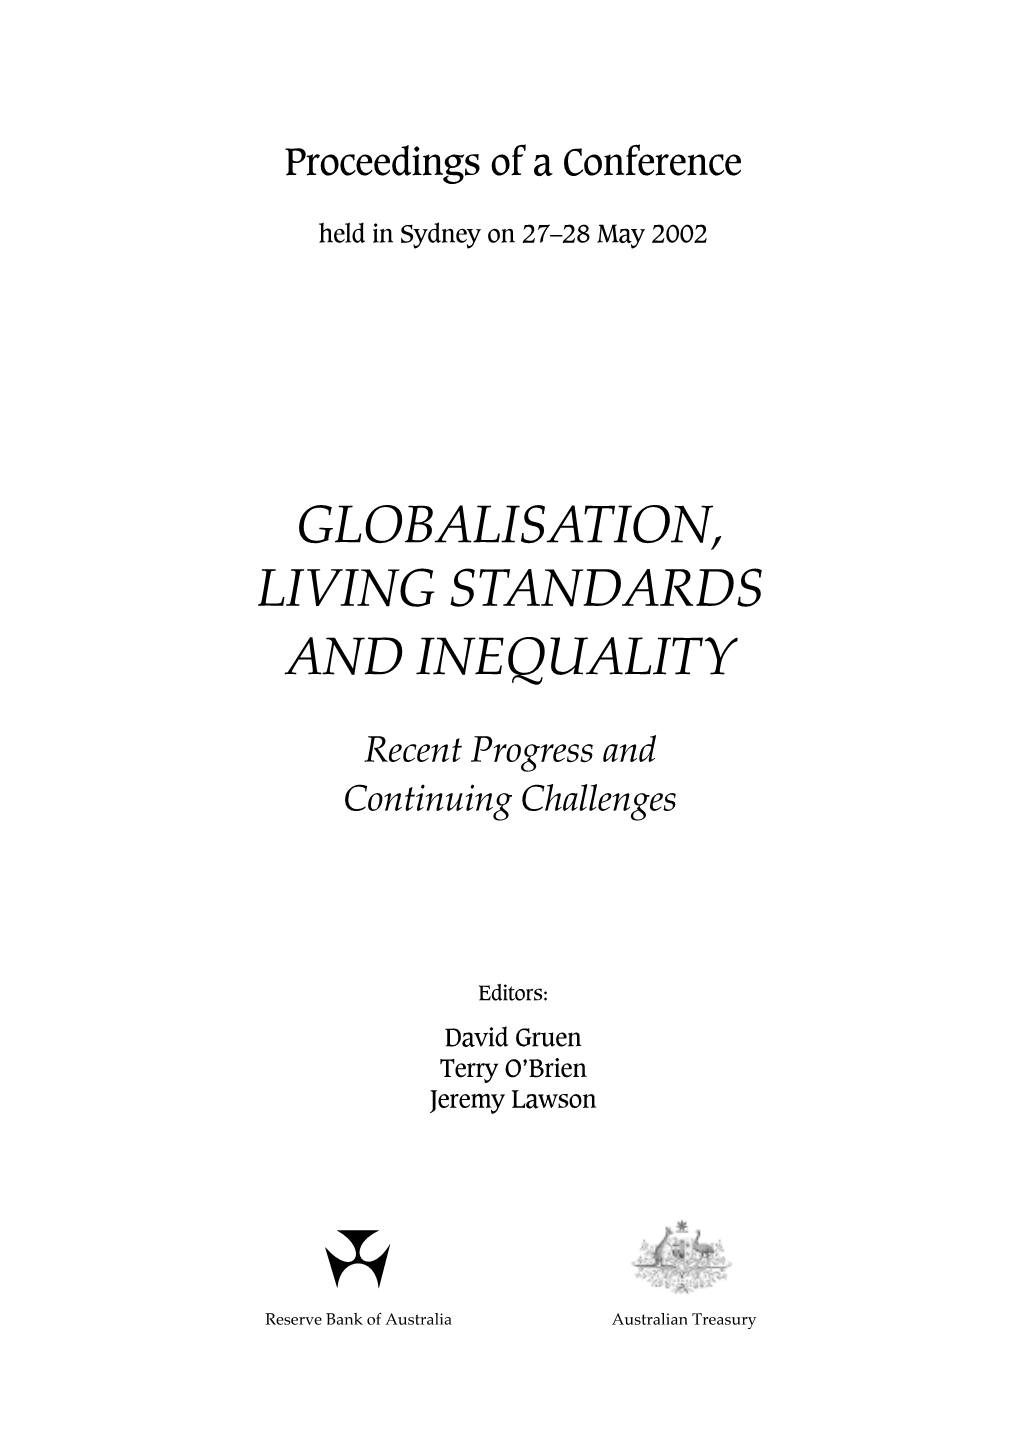 Globalisation, Living Standards and Inequality Grew out of This Enhanced Interest in Globalisation on the Part of the G-20